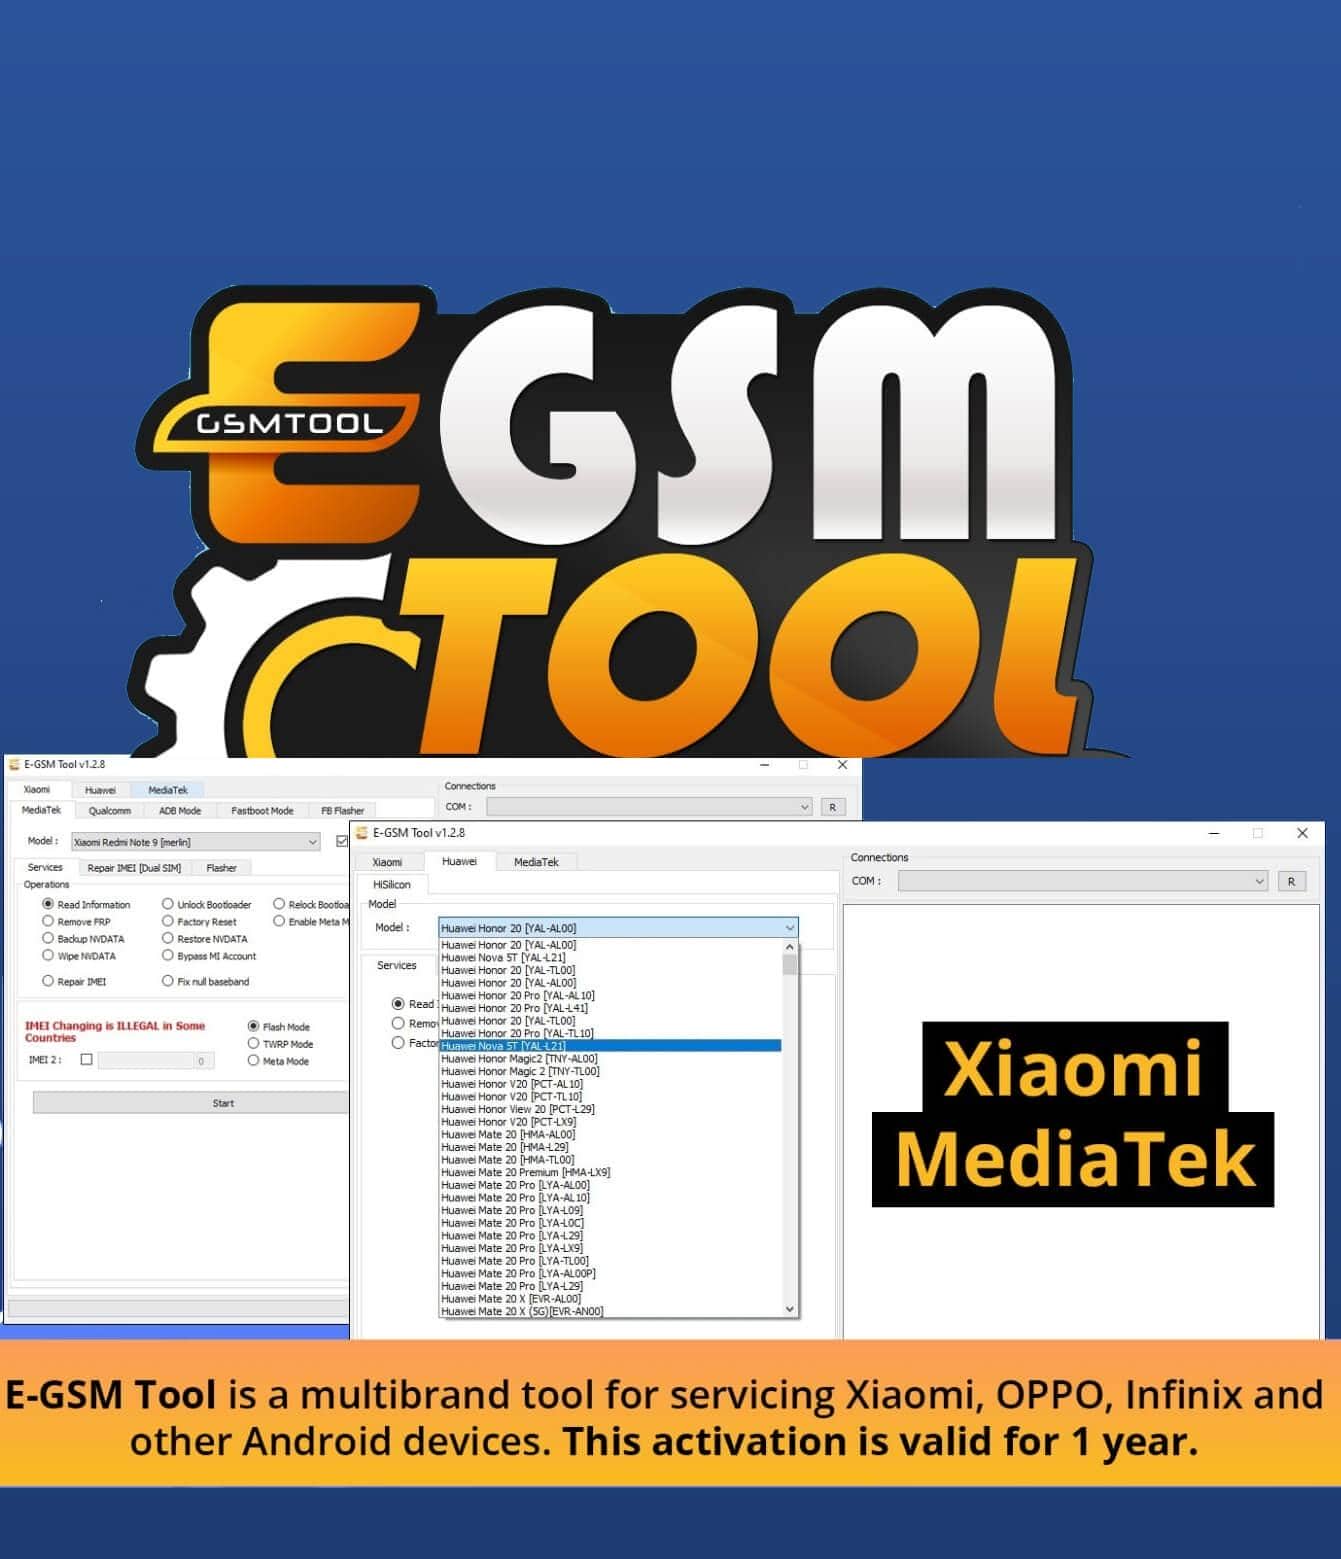 E-GSM Tool v1.4.3 has been released